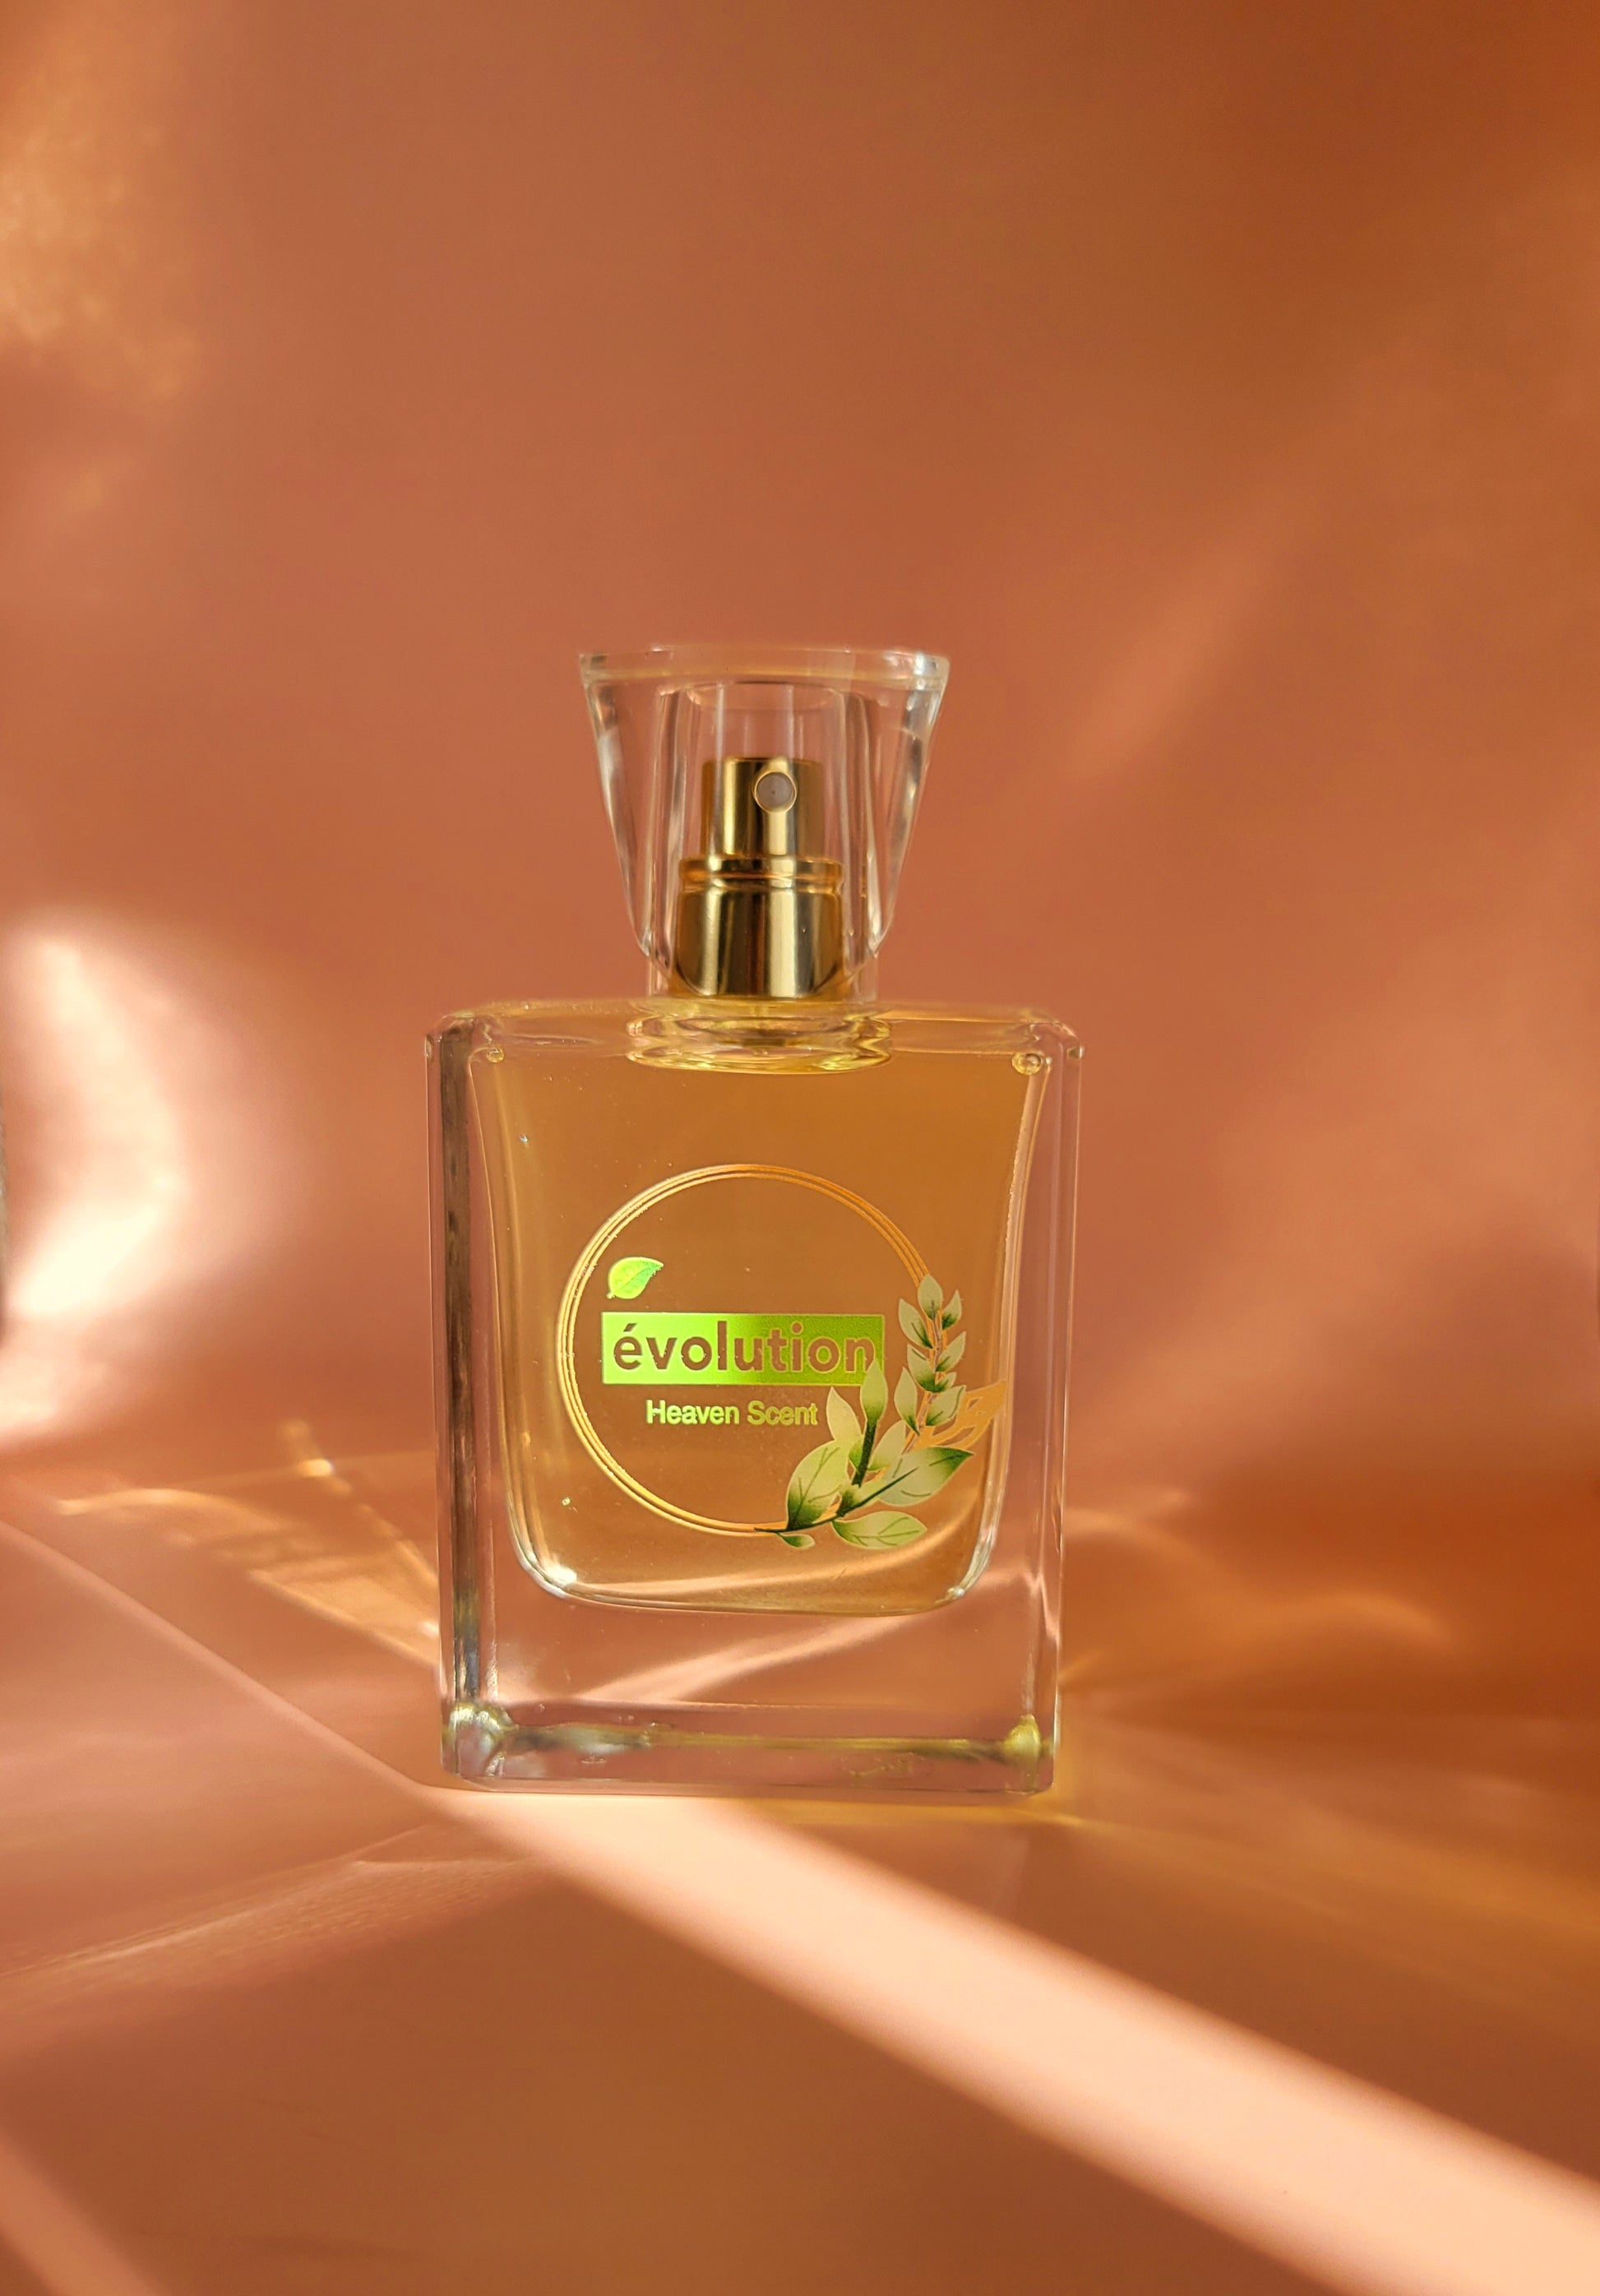 Floral woody musk perfume - Evolution Fragrance